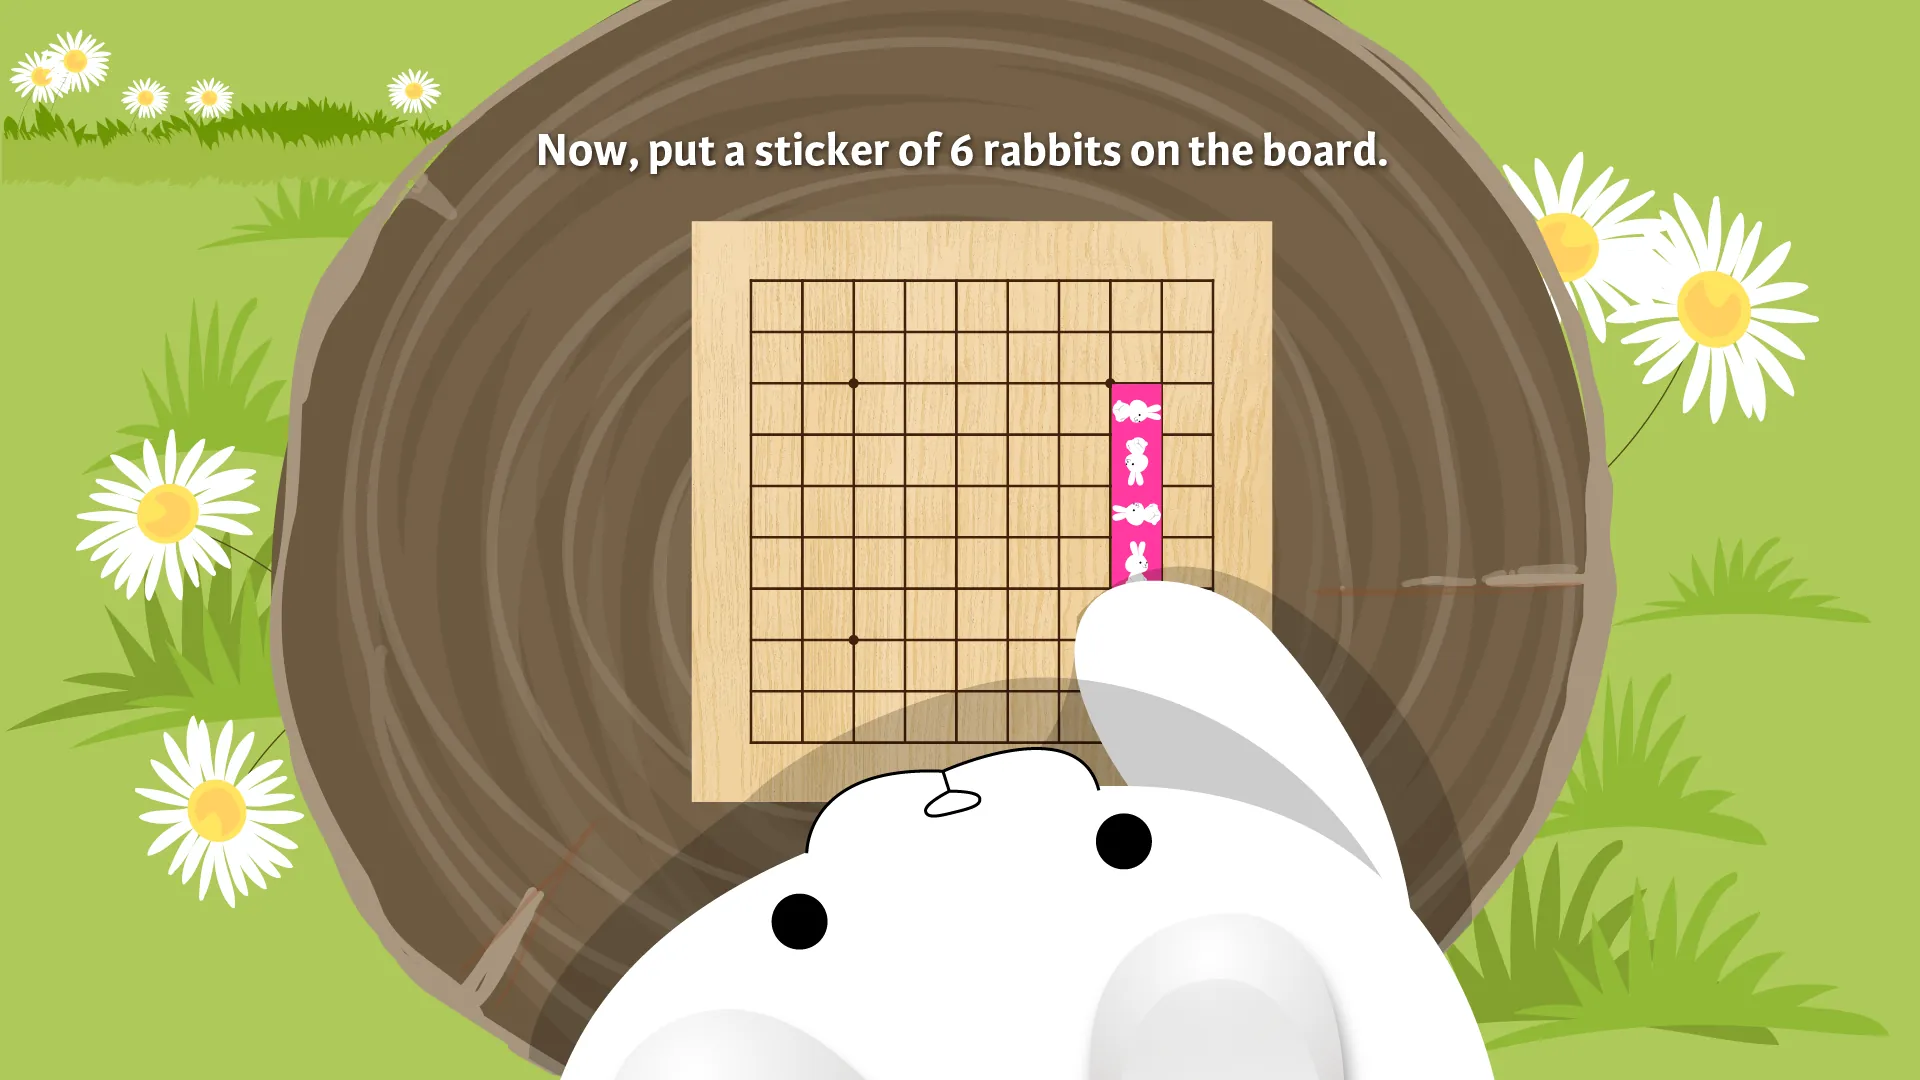 Now, put a sticker of 6 rabbits on the board.